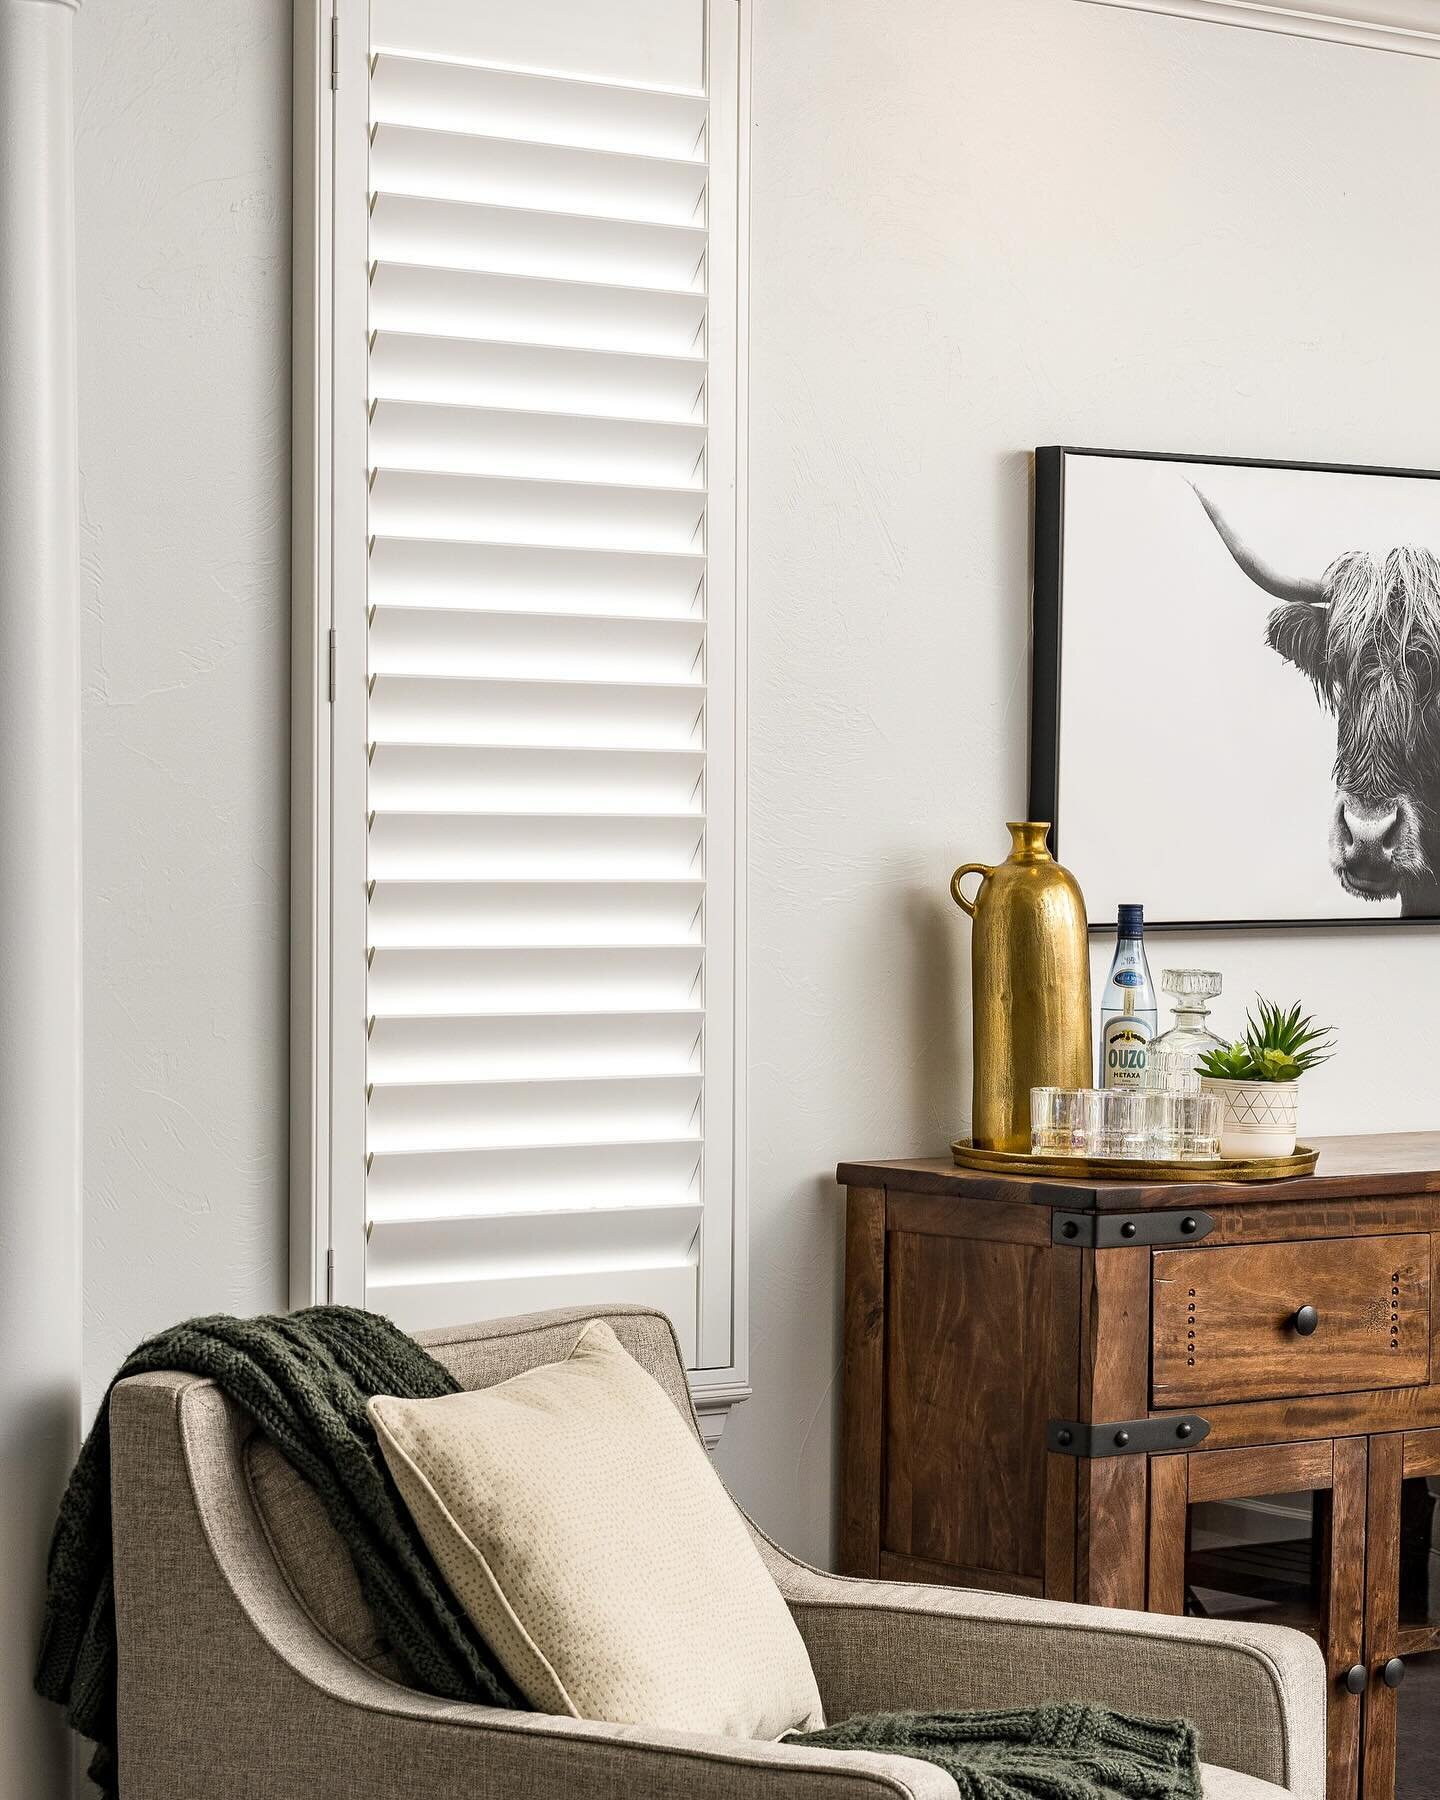 Turn your world merry and bright with our timeless shutters!💡🎄 From the heart of your home to cozy nooks, these shutters add both style and functionality to any space. Ready to elevate your holiday spirit? Secure your FREE in-home consultation now 